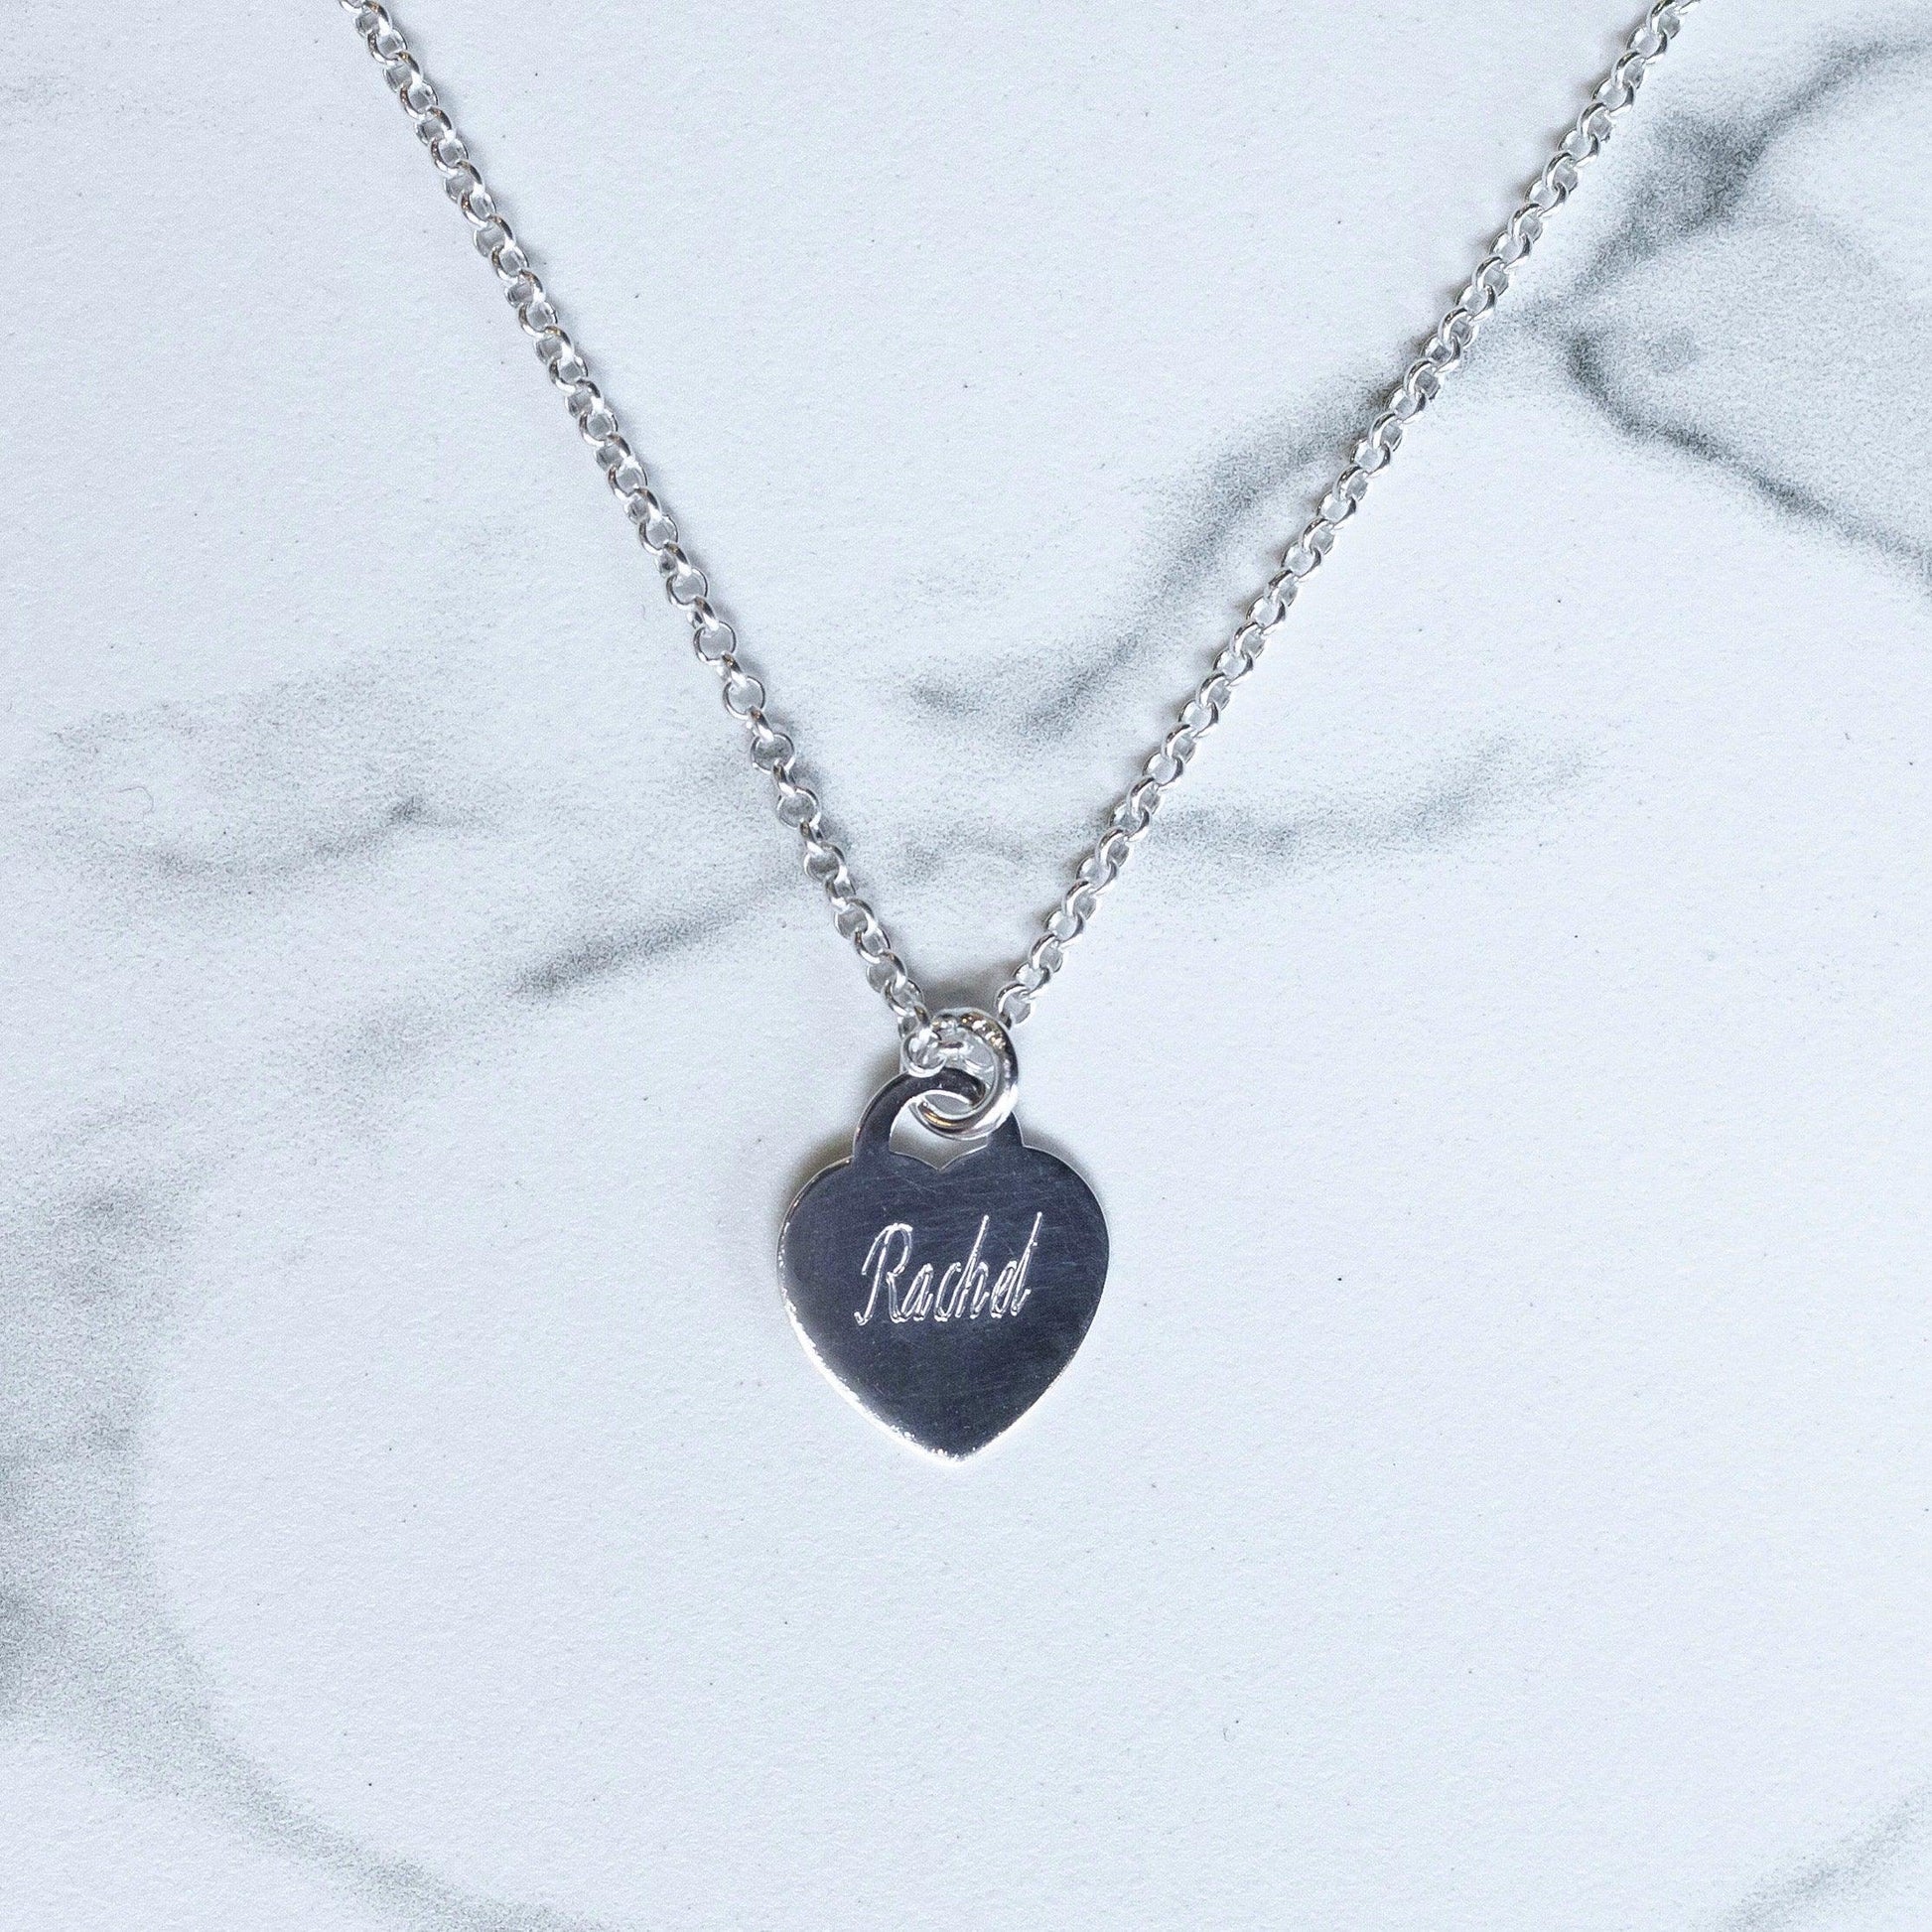 Mother's Day - Mama Bear - Engraved Personalised Silver Necklace - RACHEL SHRIEVES DESIGN